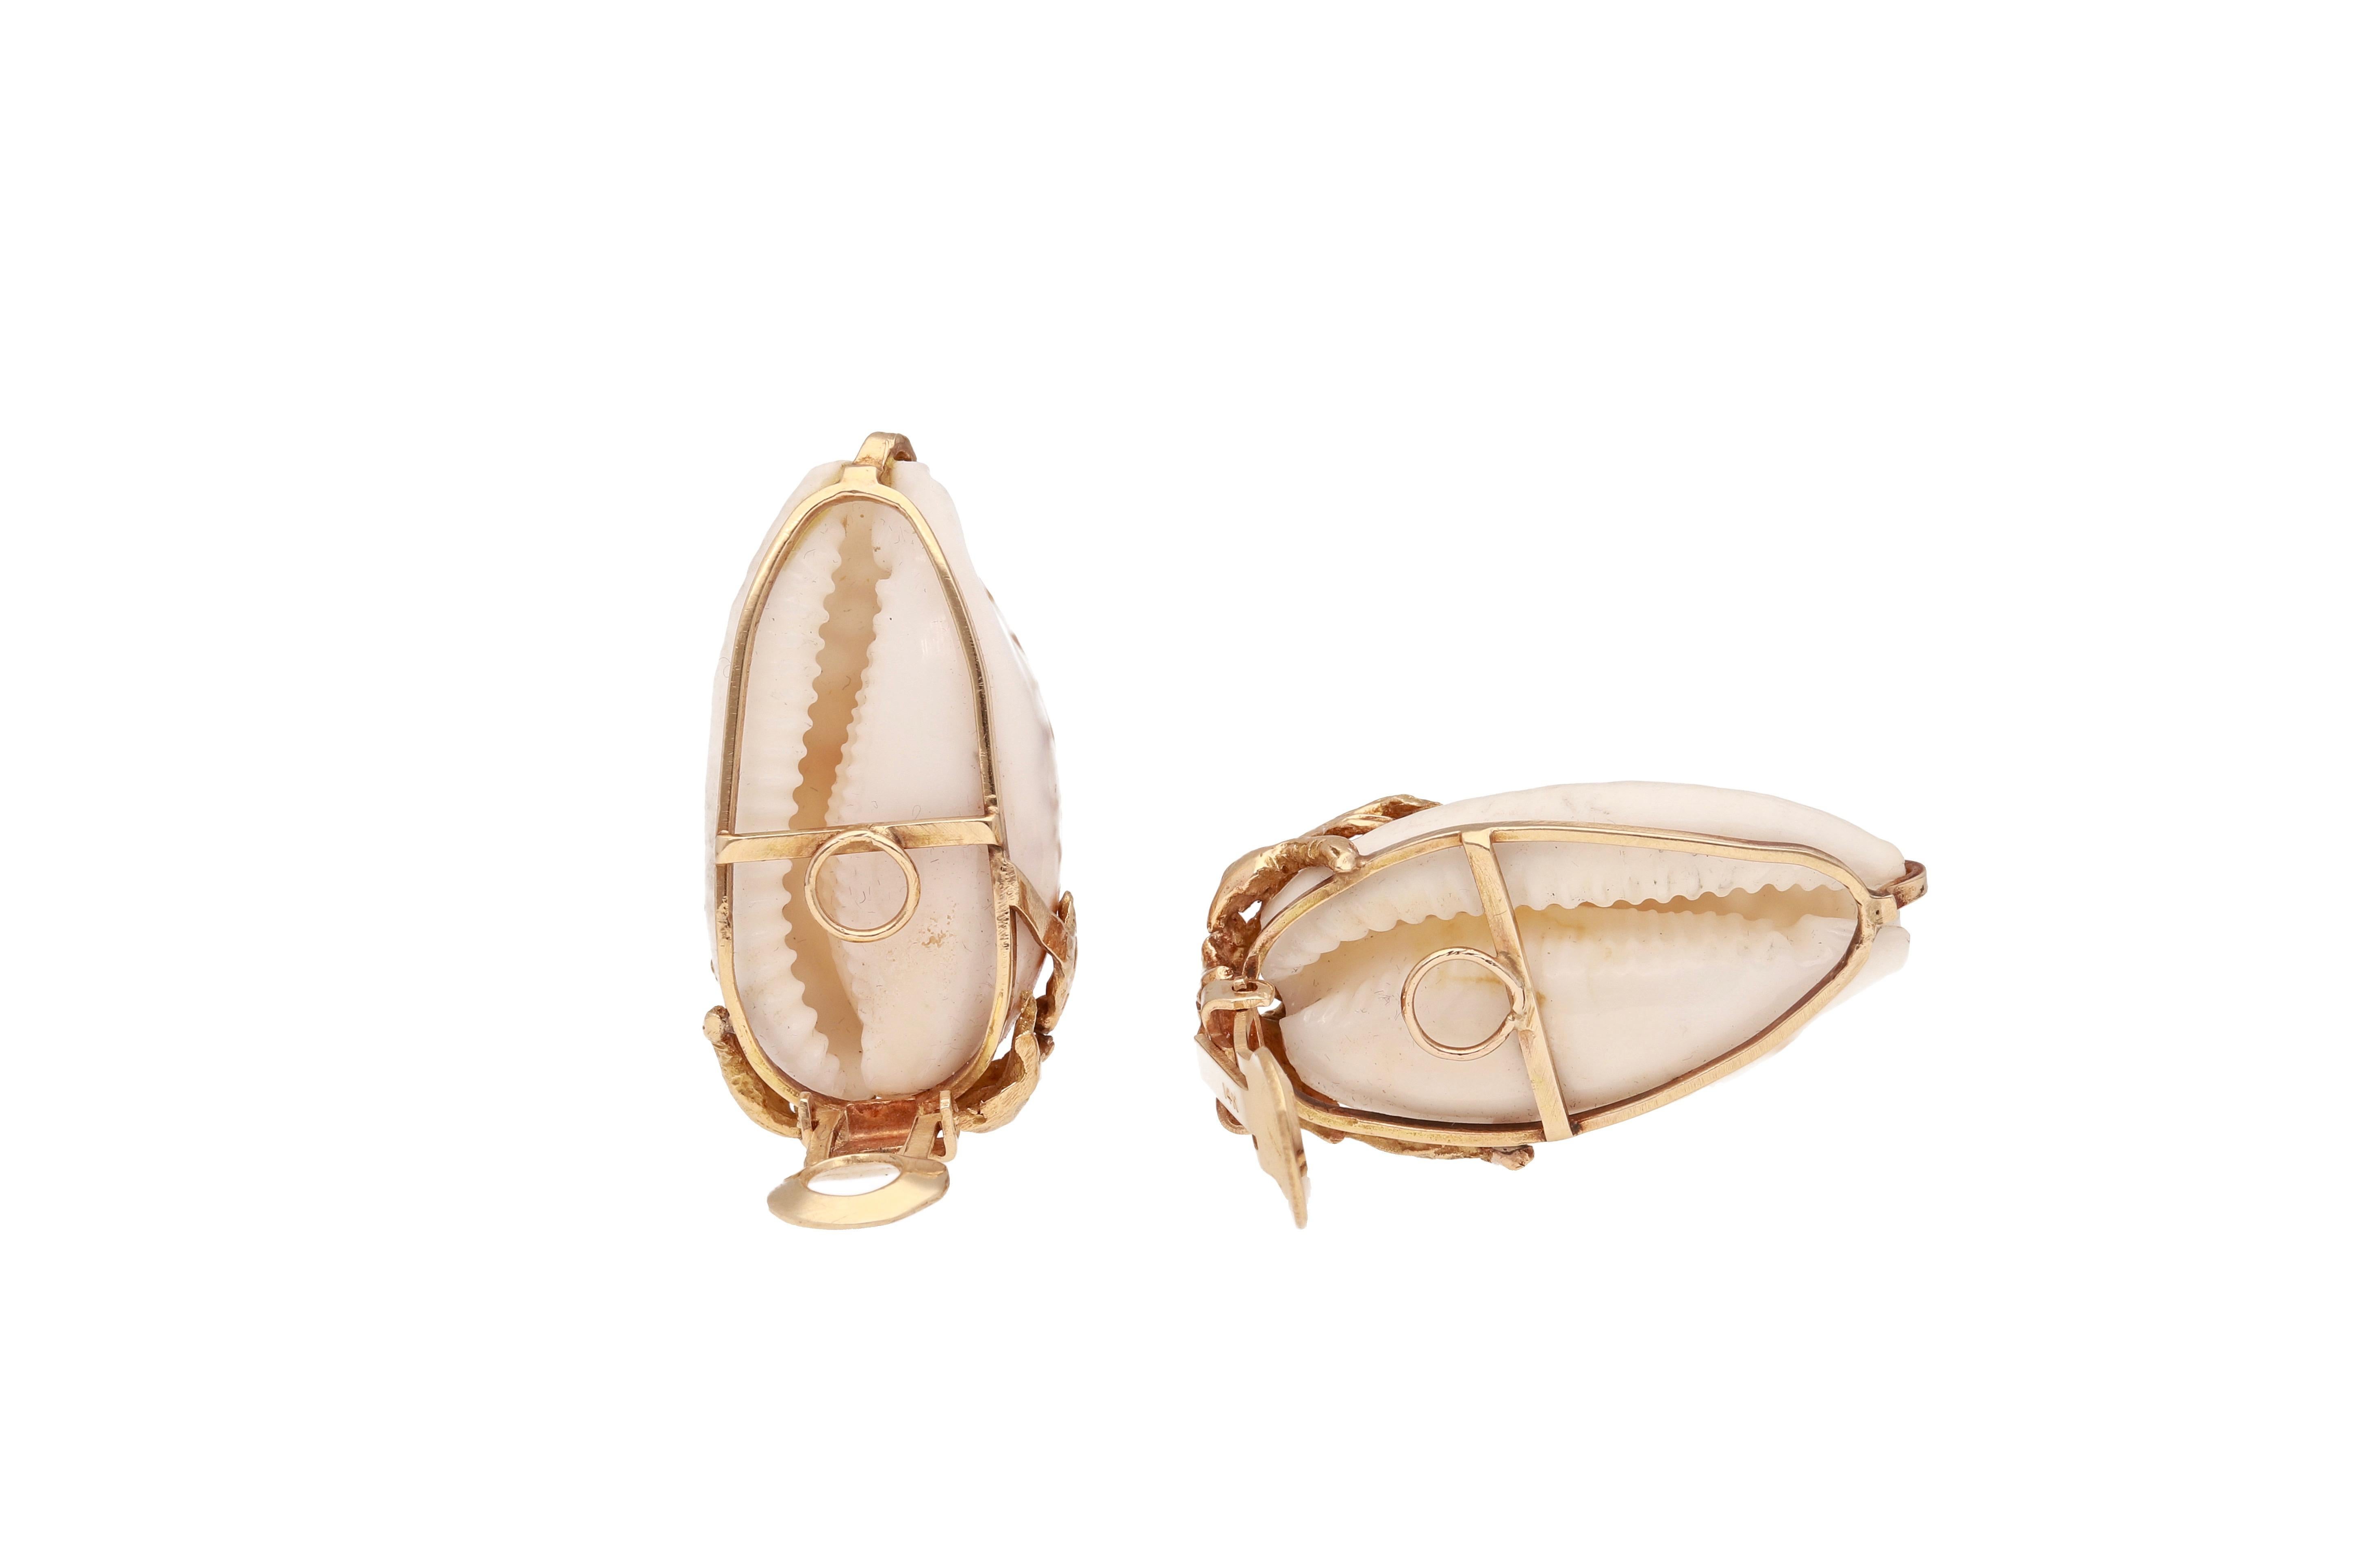 14 Kt. yellow gold clip-on earrings with sea shells.
This pair of earrings are hand-Made in USA.